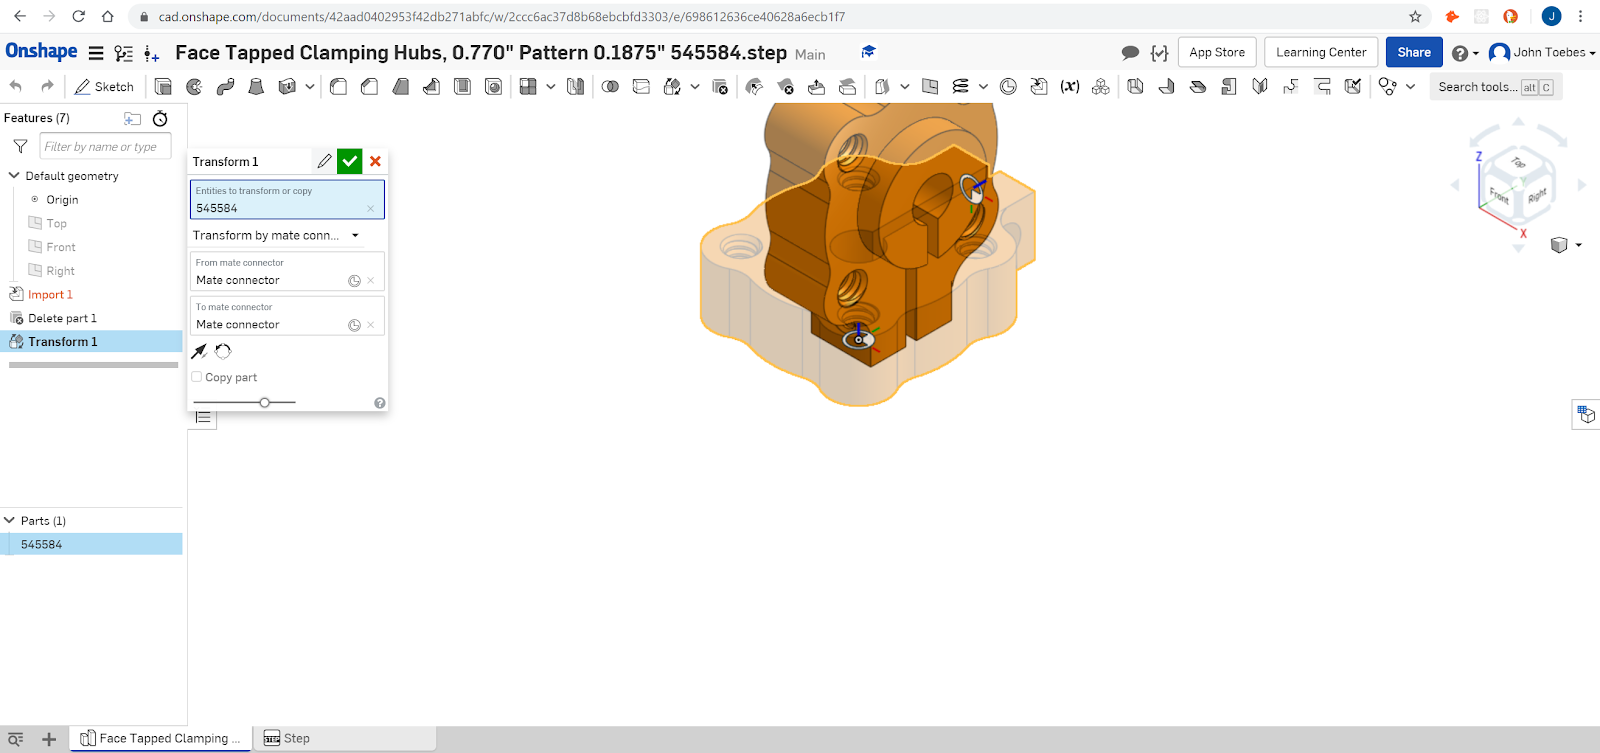 Editing a Part which includes Screws in Onshape - Using Onshape for FTC